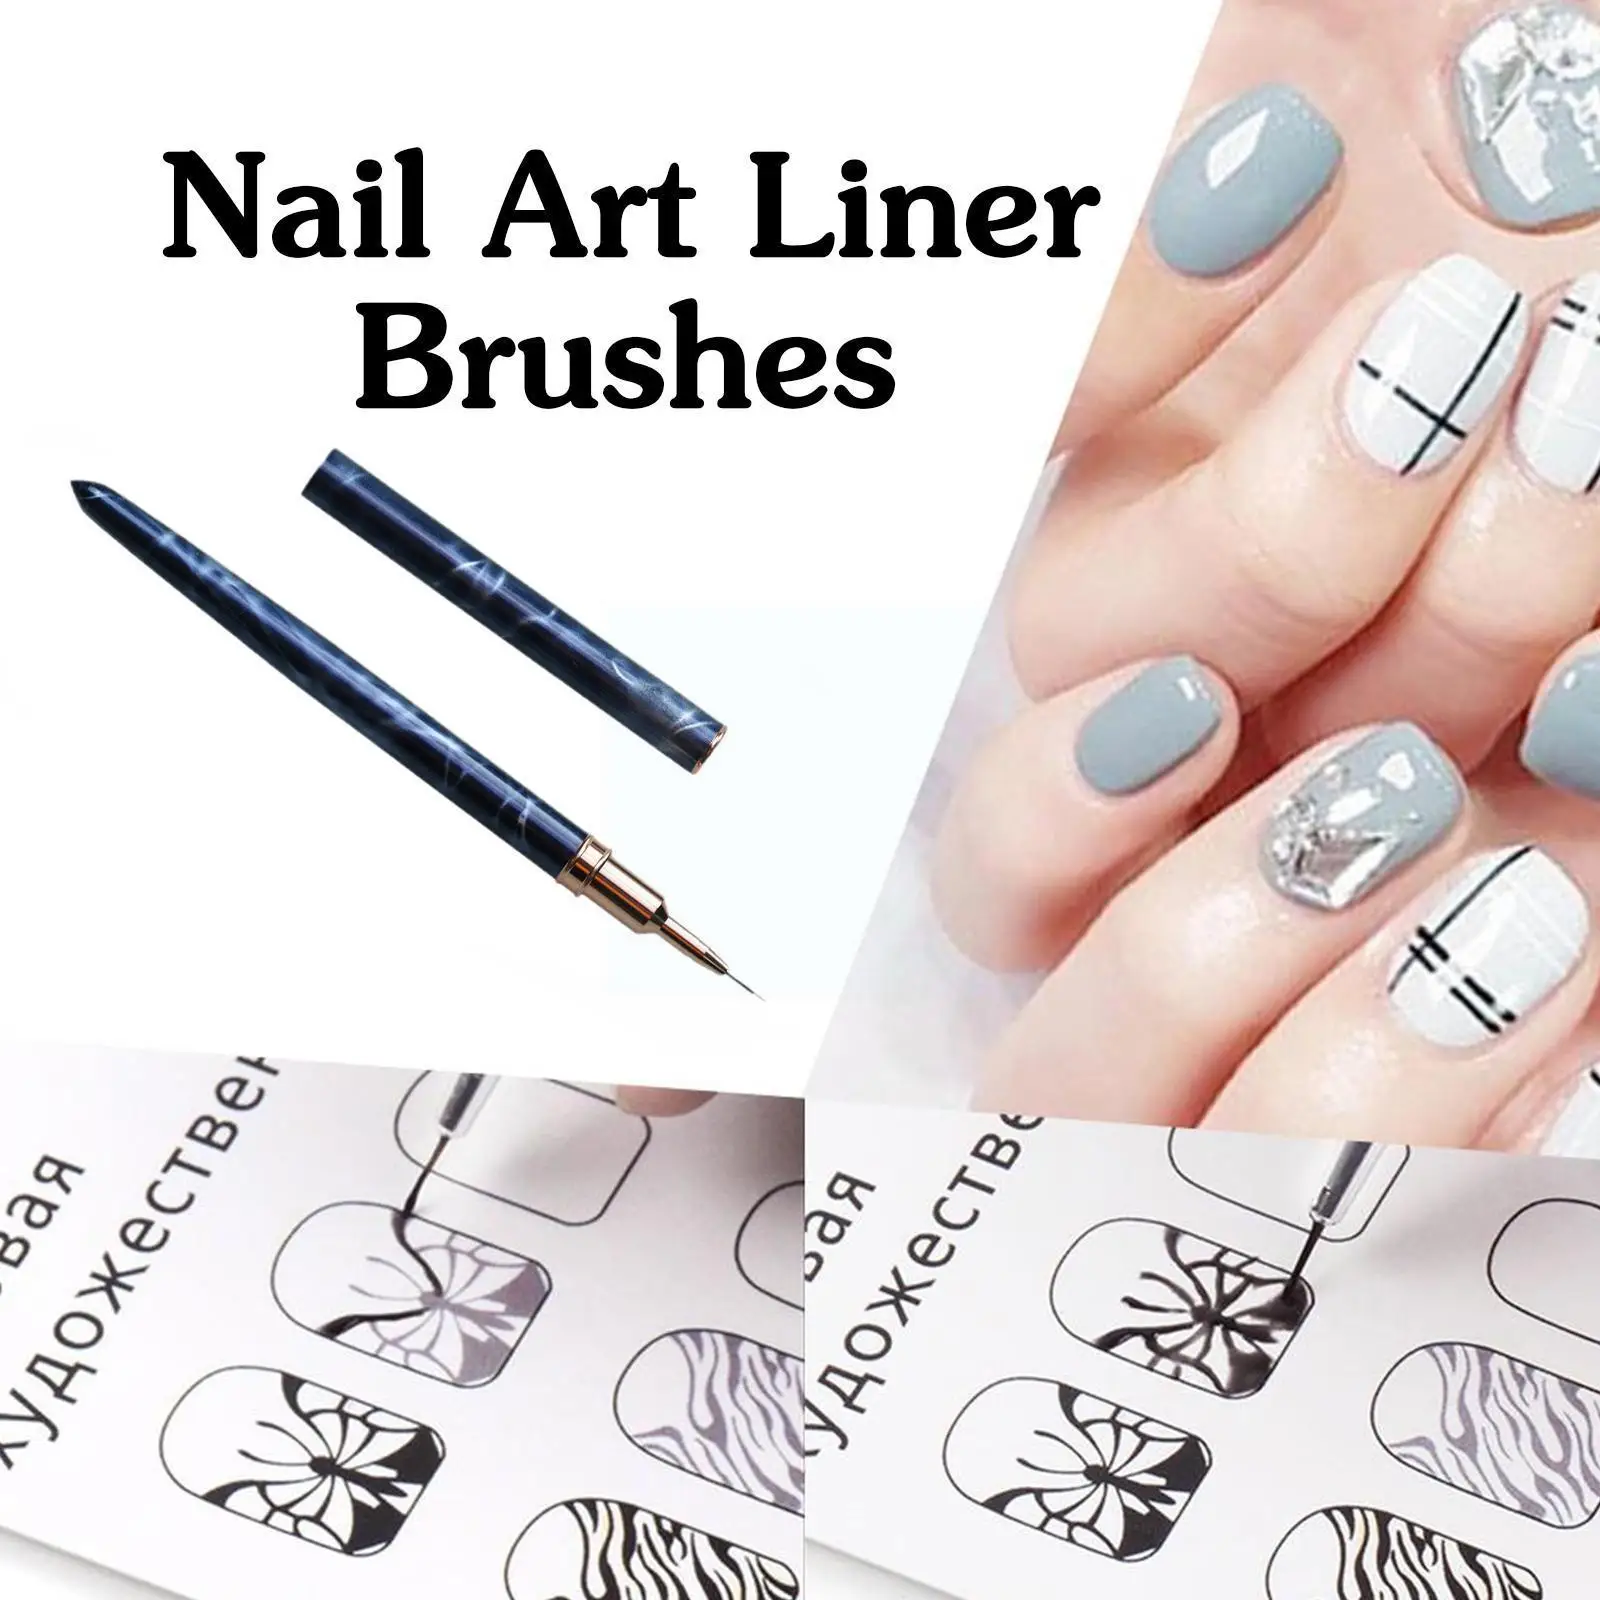 

Nail Art Liner Brushes 7mm 9mm 11mm 15mm 25mm Painting Pen 3D DIY Acrylic UV Gel Brushes Drawing Kit For Long Lines Black Y9B5